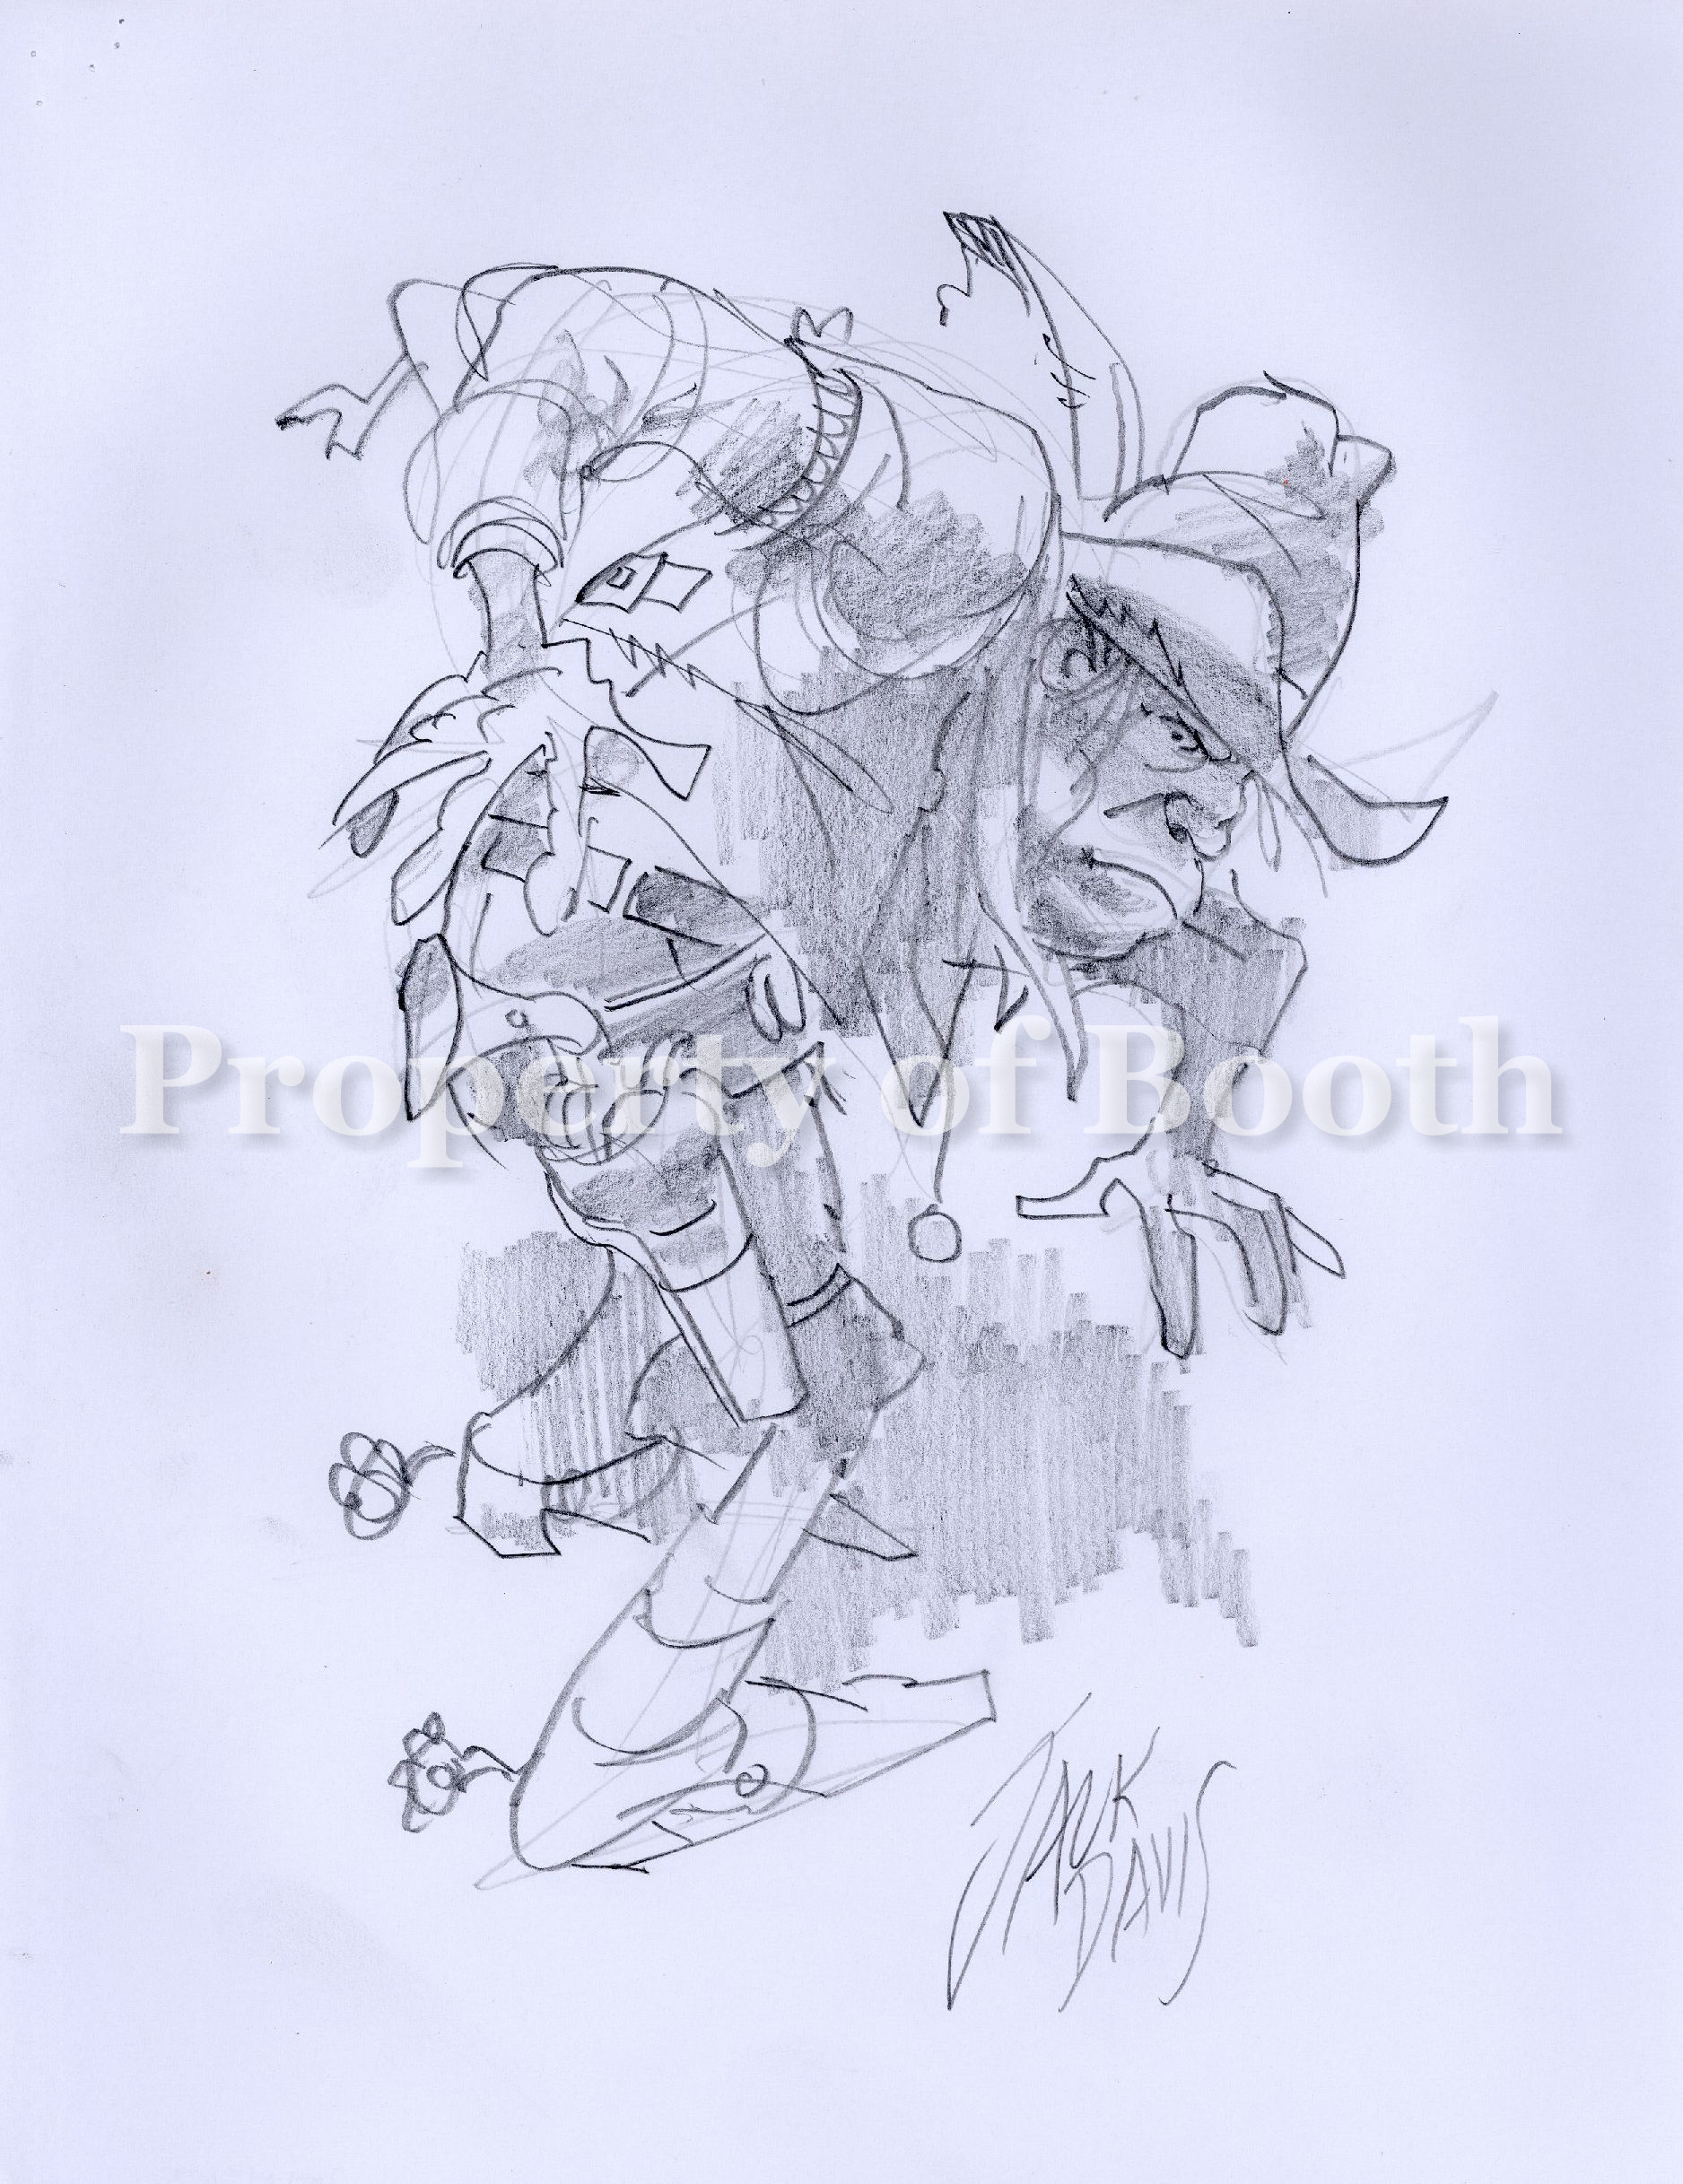 © Jack Davis, 2004, pencil on paper, 11 x 8.5", Gift of the Artist